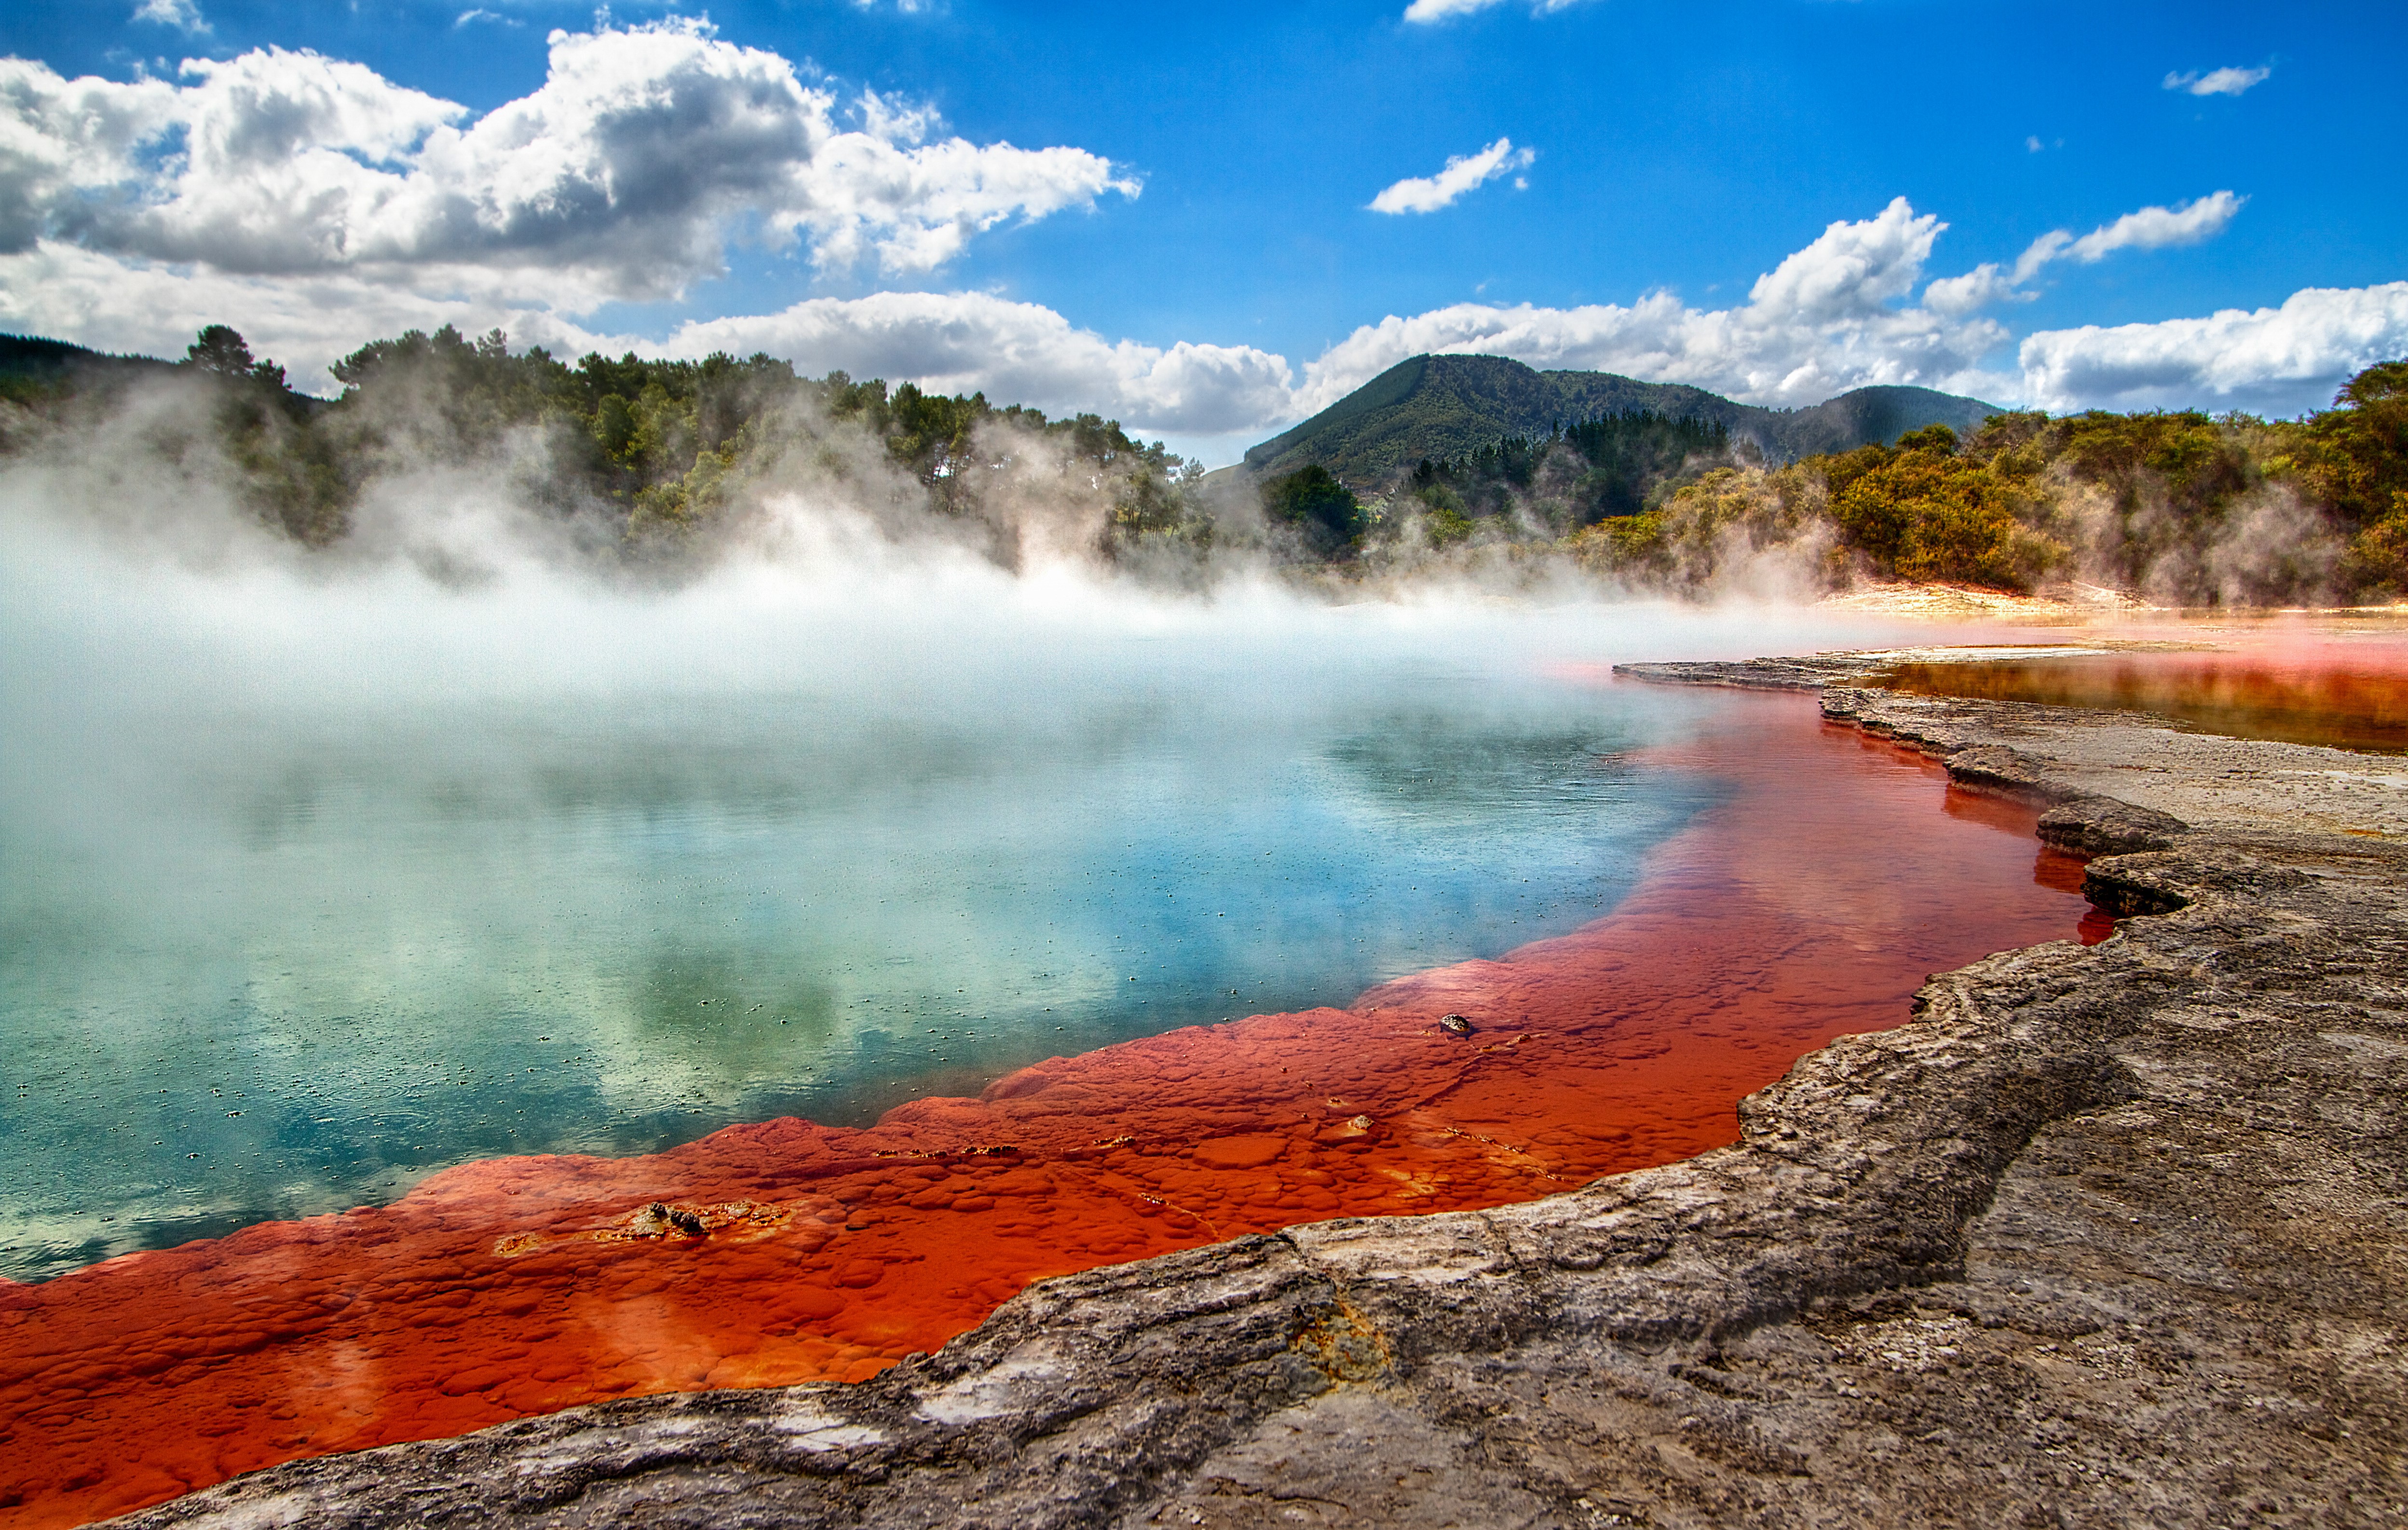 Begin your tour by taking in Wai-O-Tapu Thermal Wonderland's unique sceneries